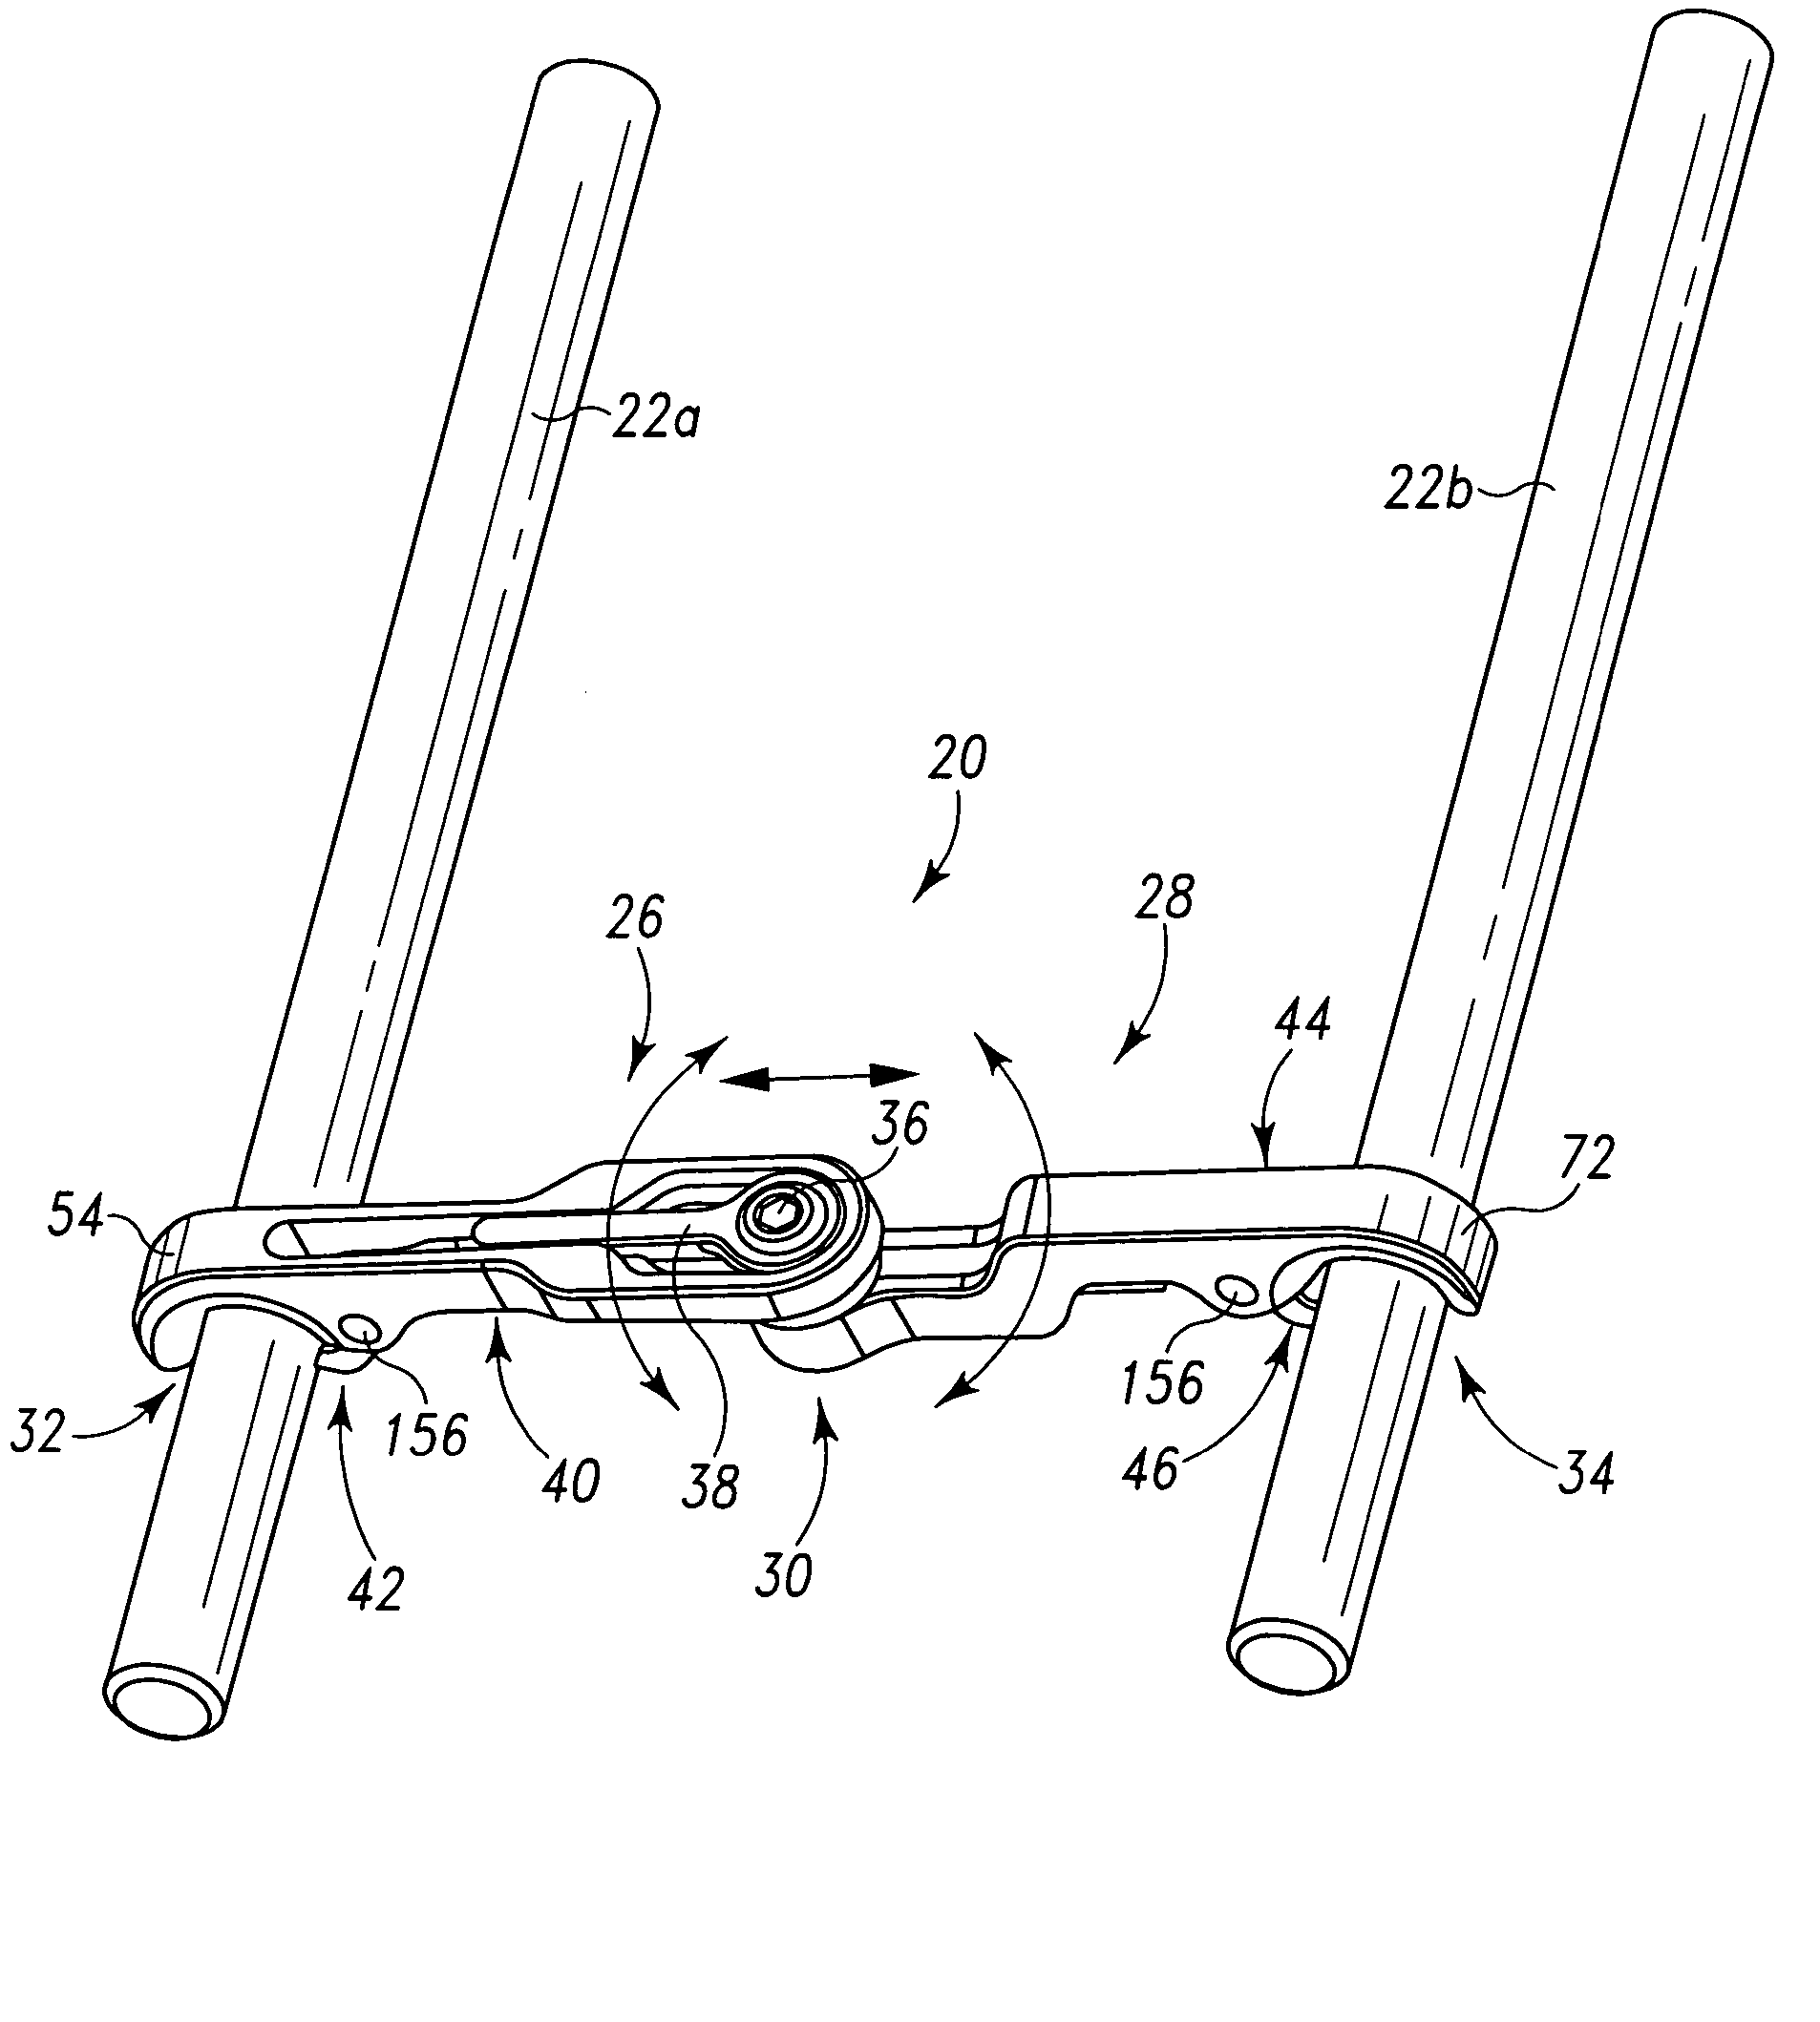 Multi-axial spinal cross-connectors